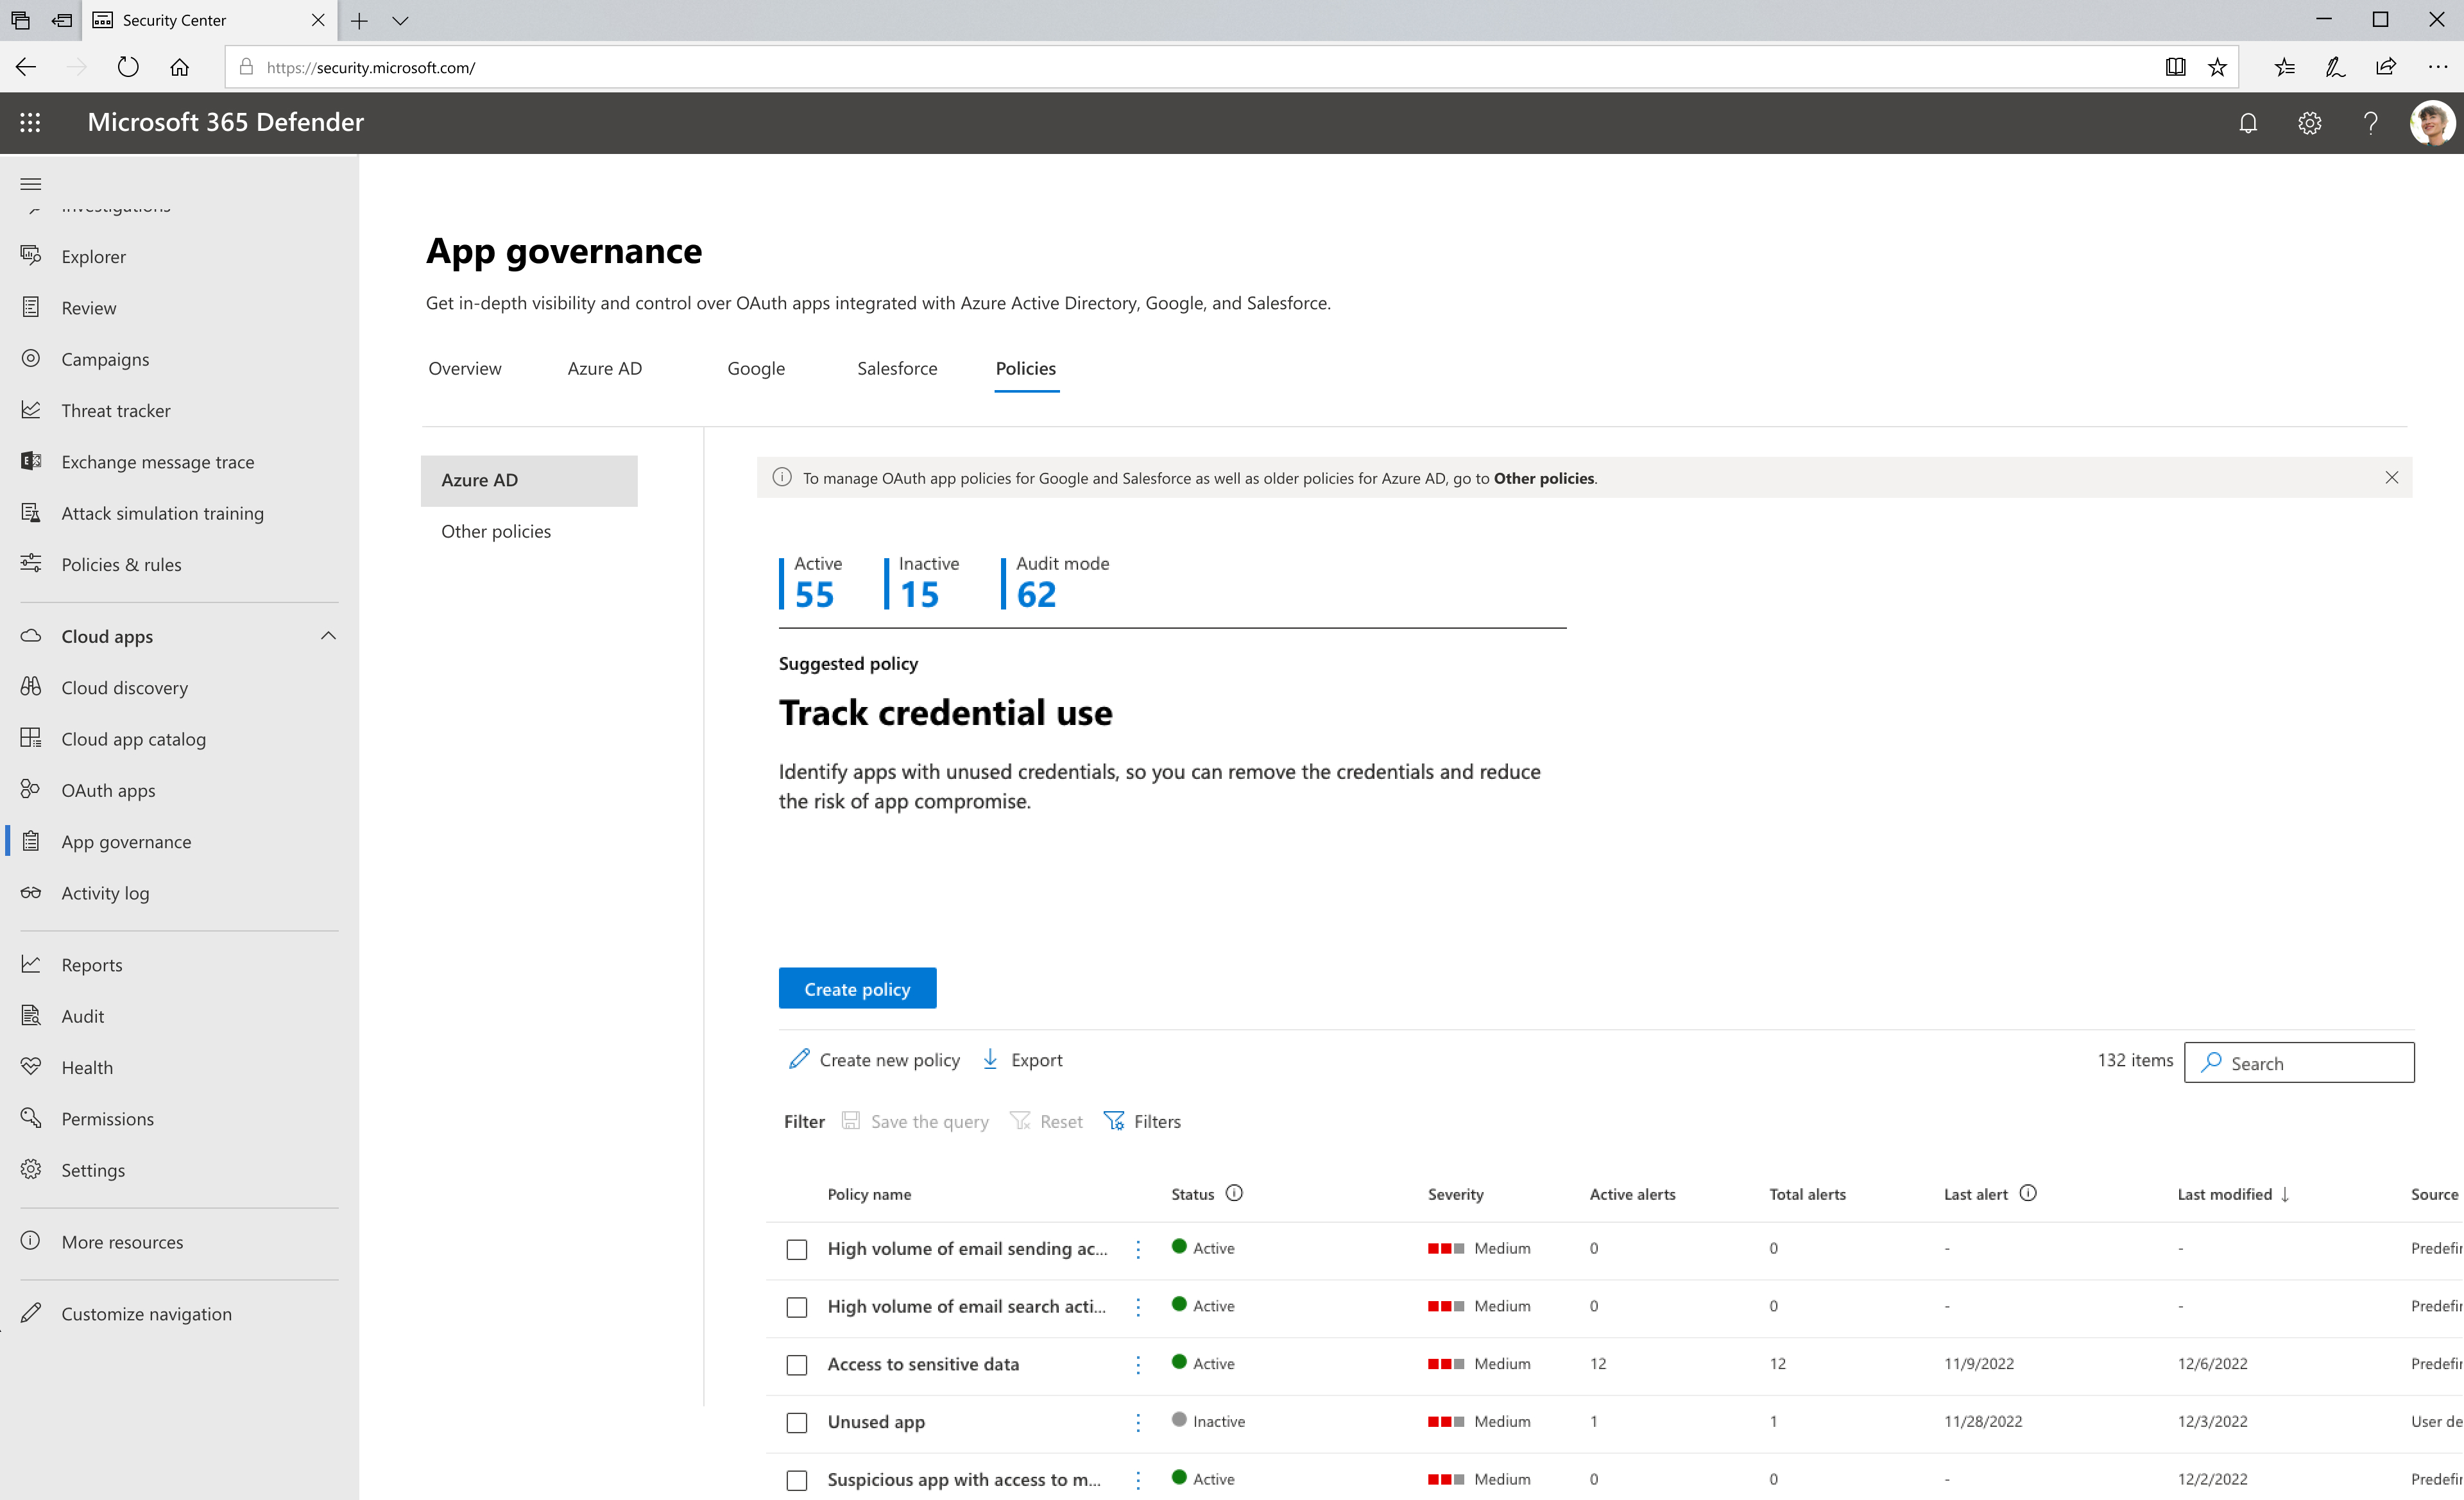 Screenshot of the app governance policies summary page in Microsoft Defender XDR.